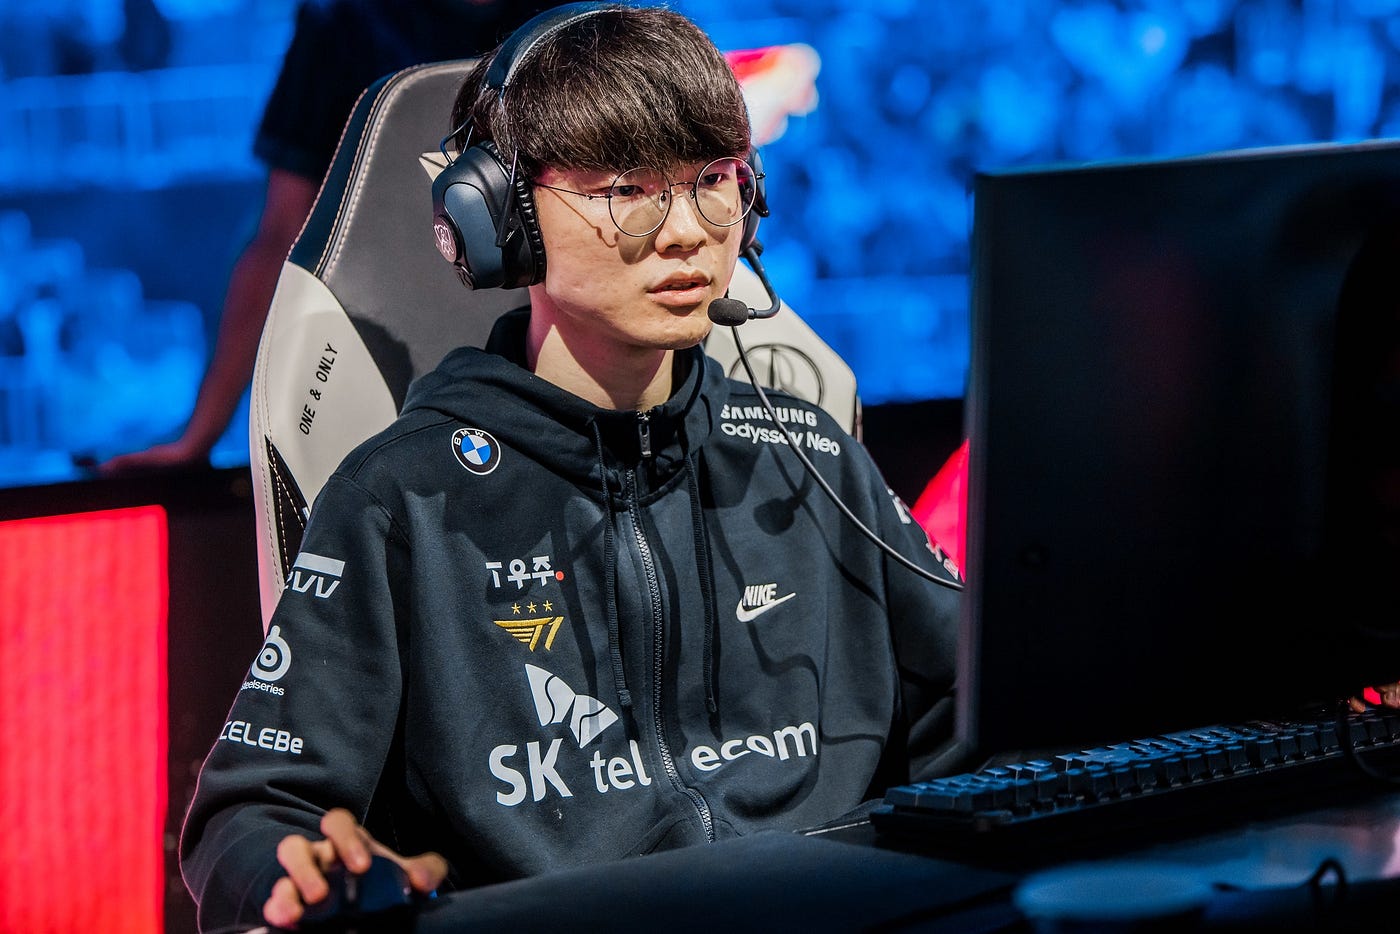 Faker - Lee, Sang Hyeok - League of Legends Player Profile :: Esports  Earnings